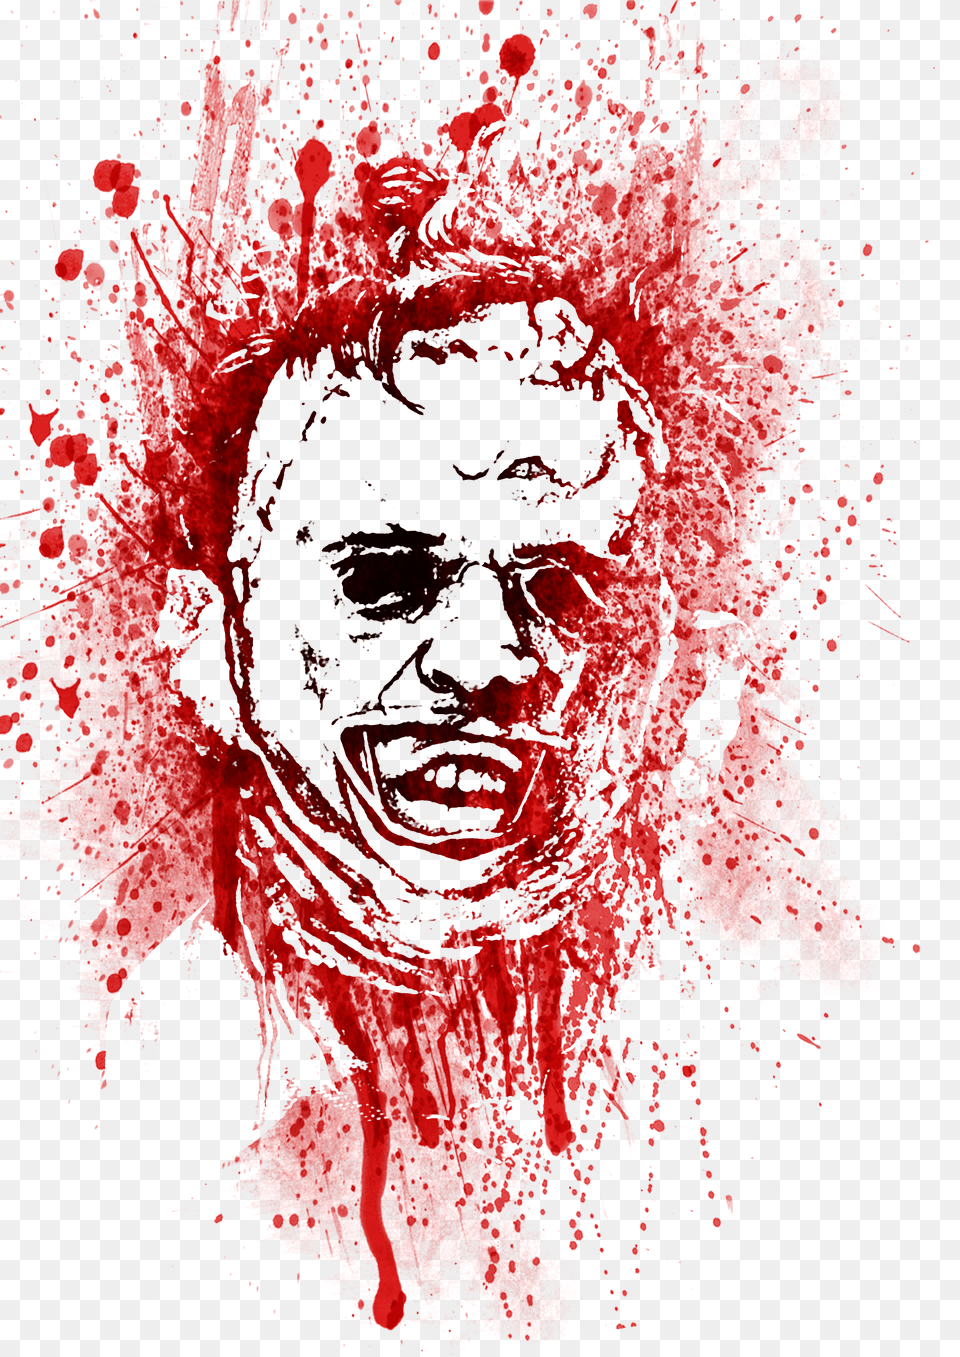 Bloody Icons Of Horror By Adriano Ott By Adriano Ott Horror, Stain Free Png Download